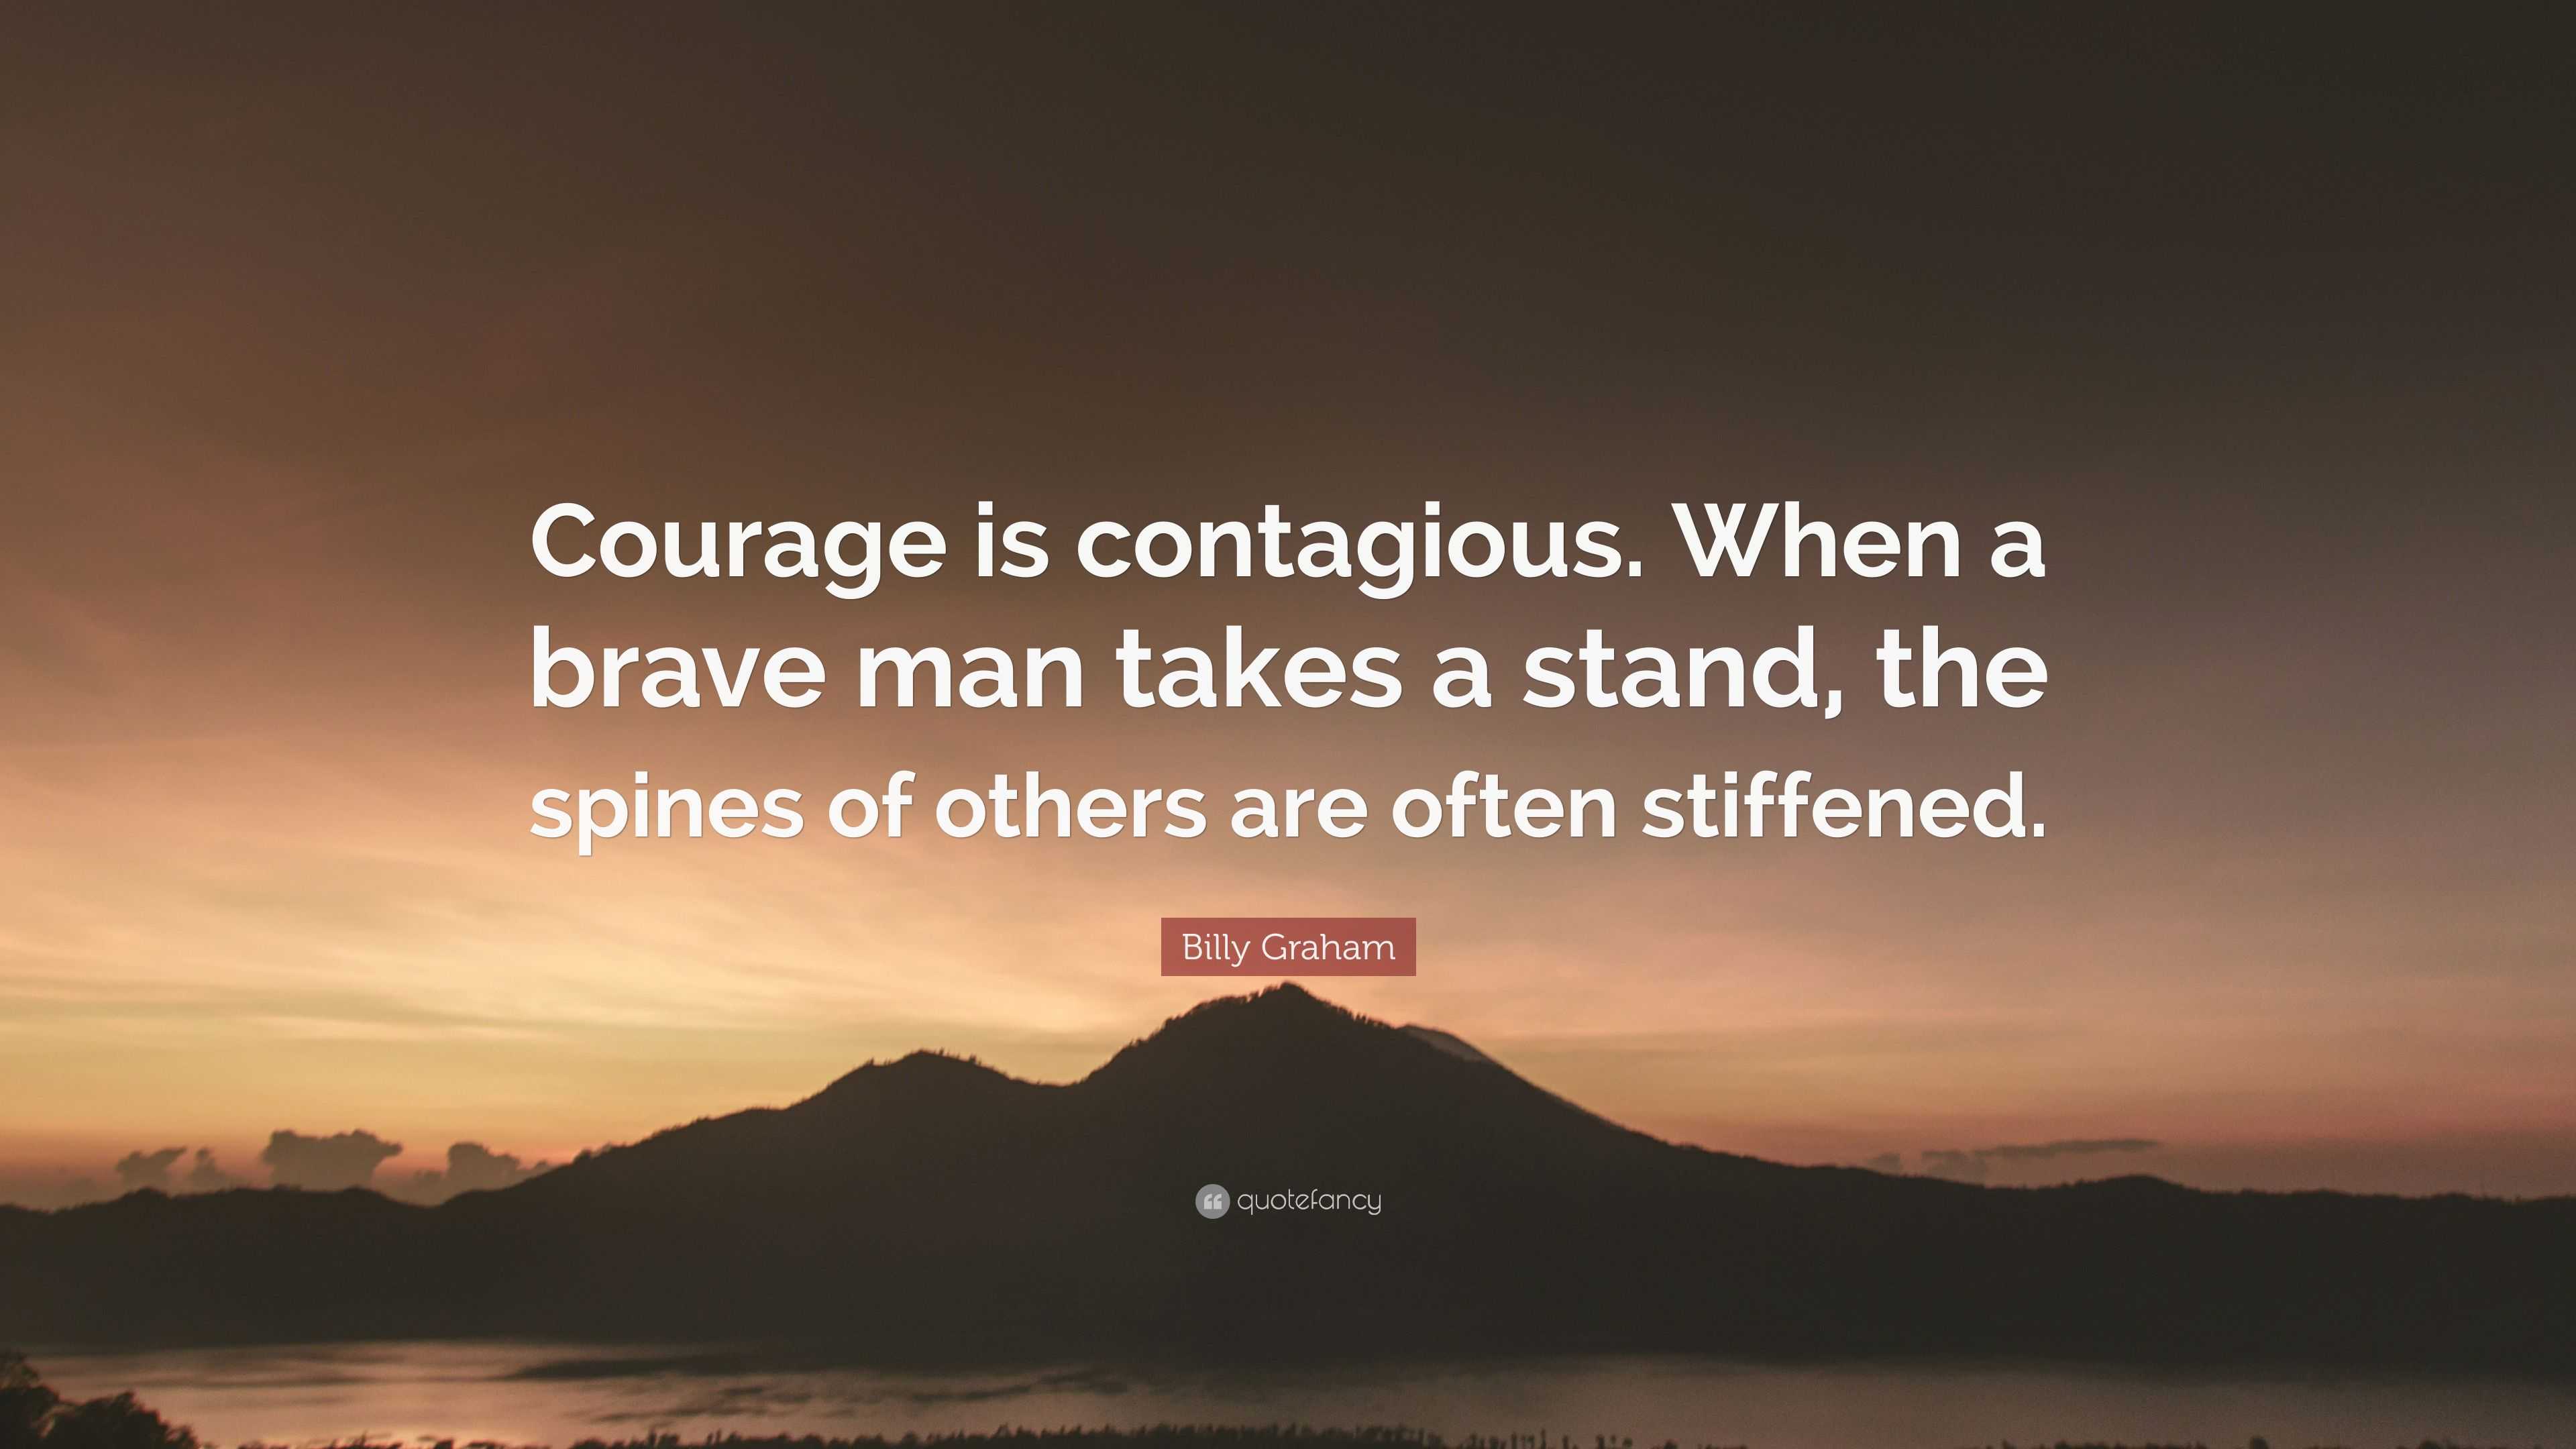 Billy Graham Quote: “Courage is contagious. When a brave man takes a ...